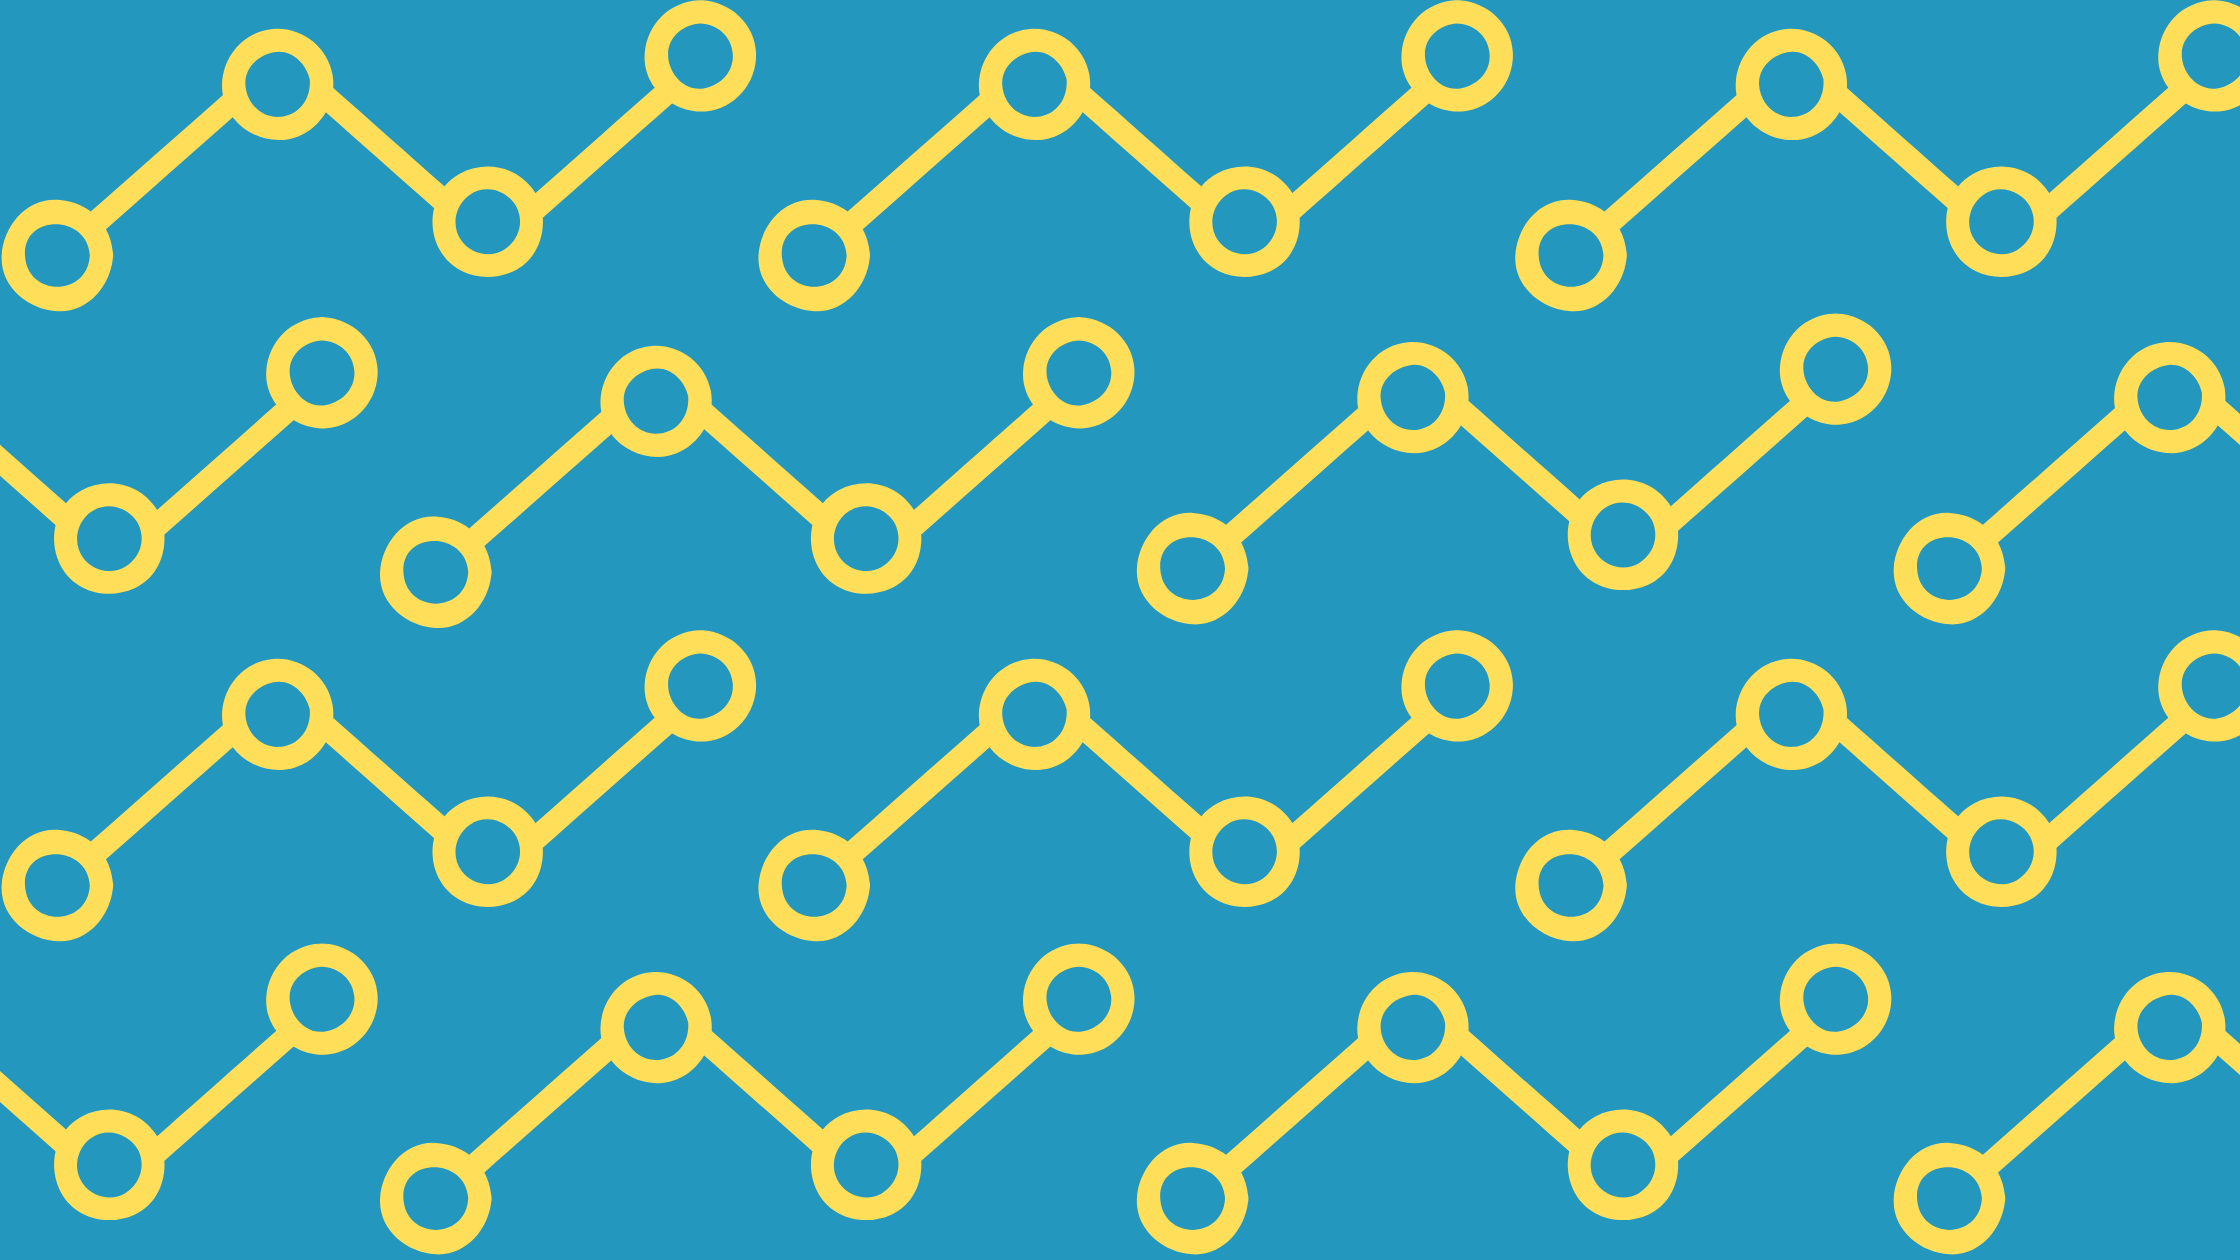 A repeating pattern of trend line icons